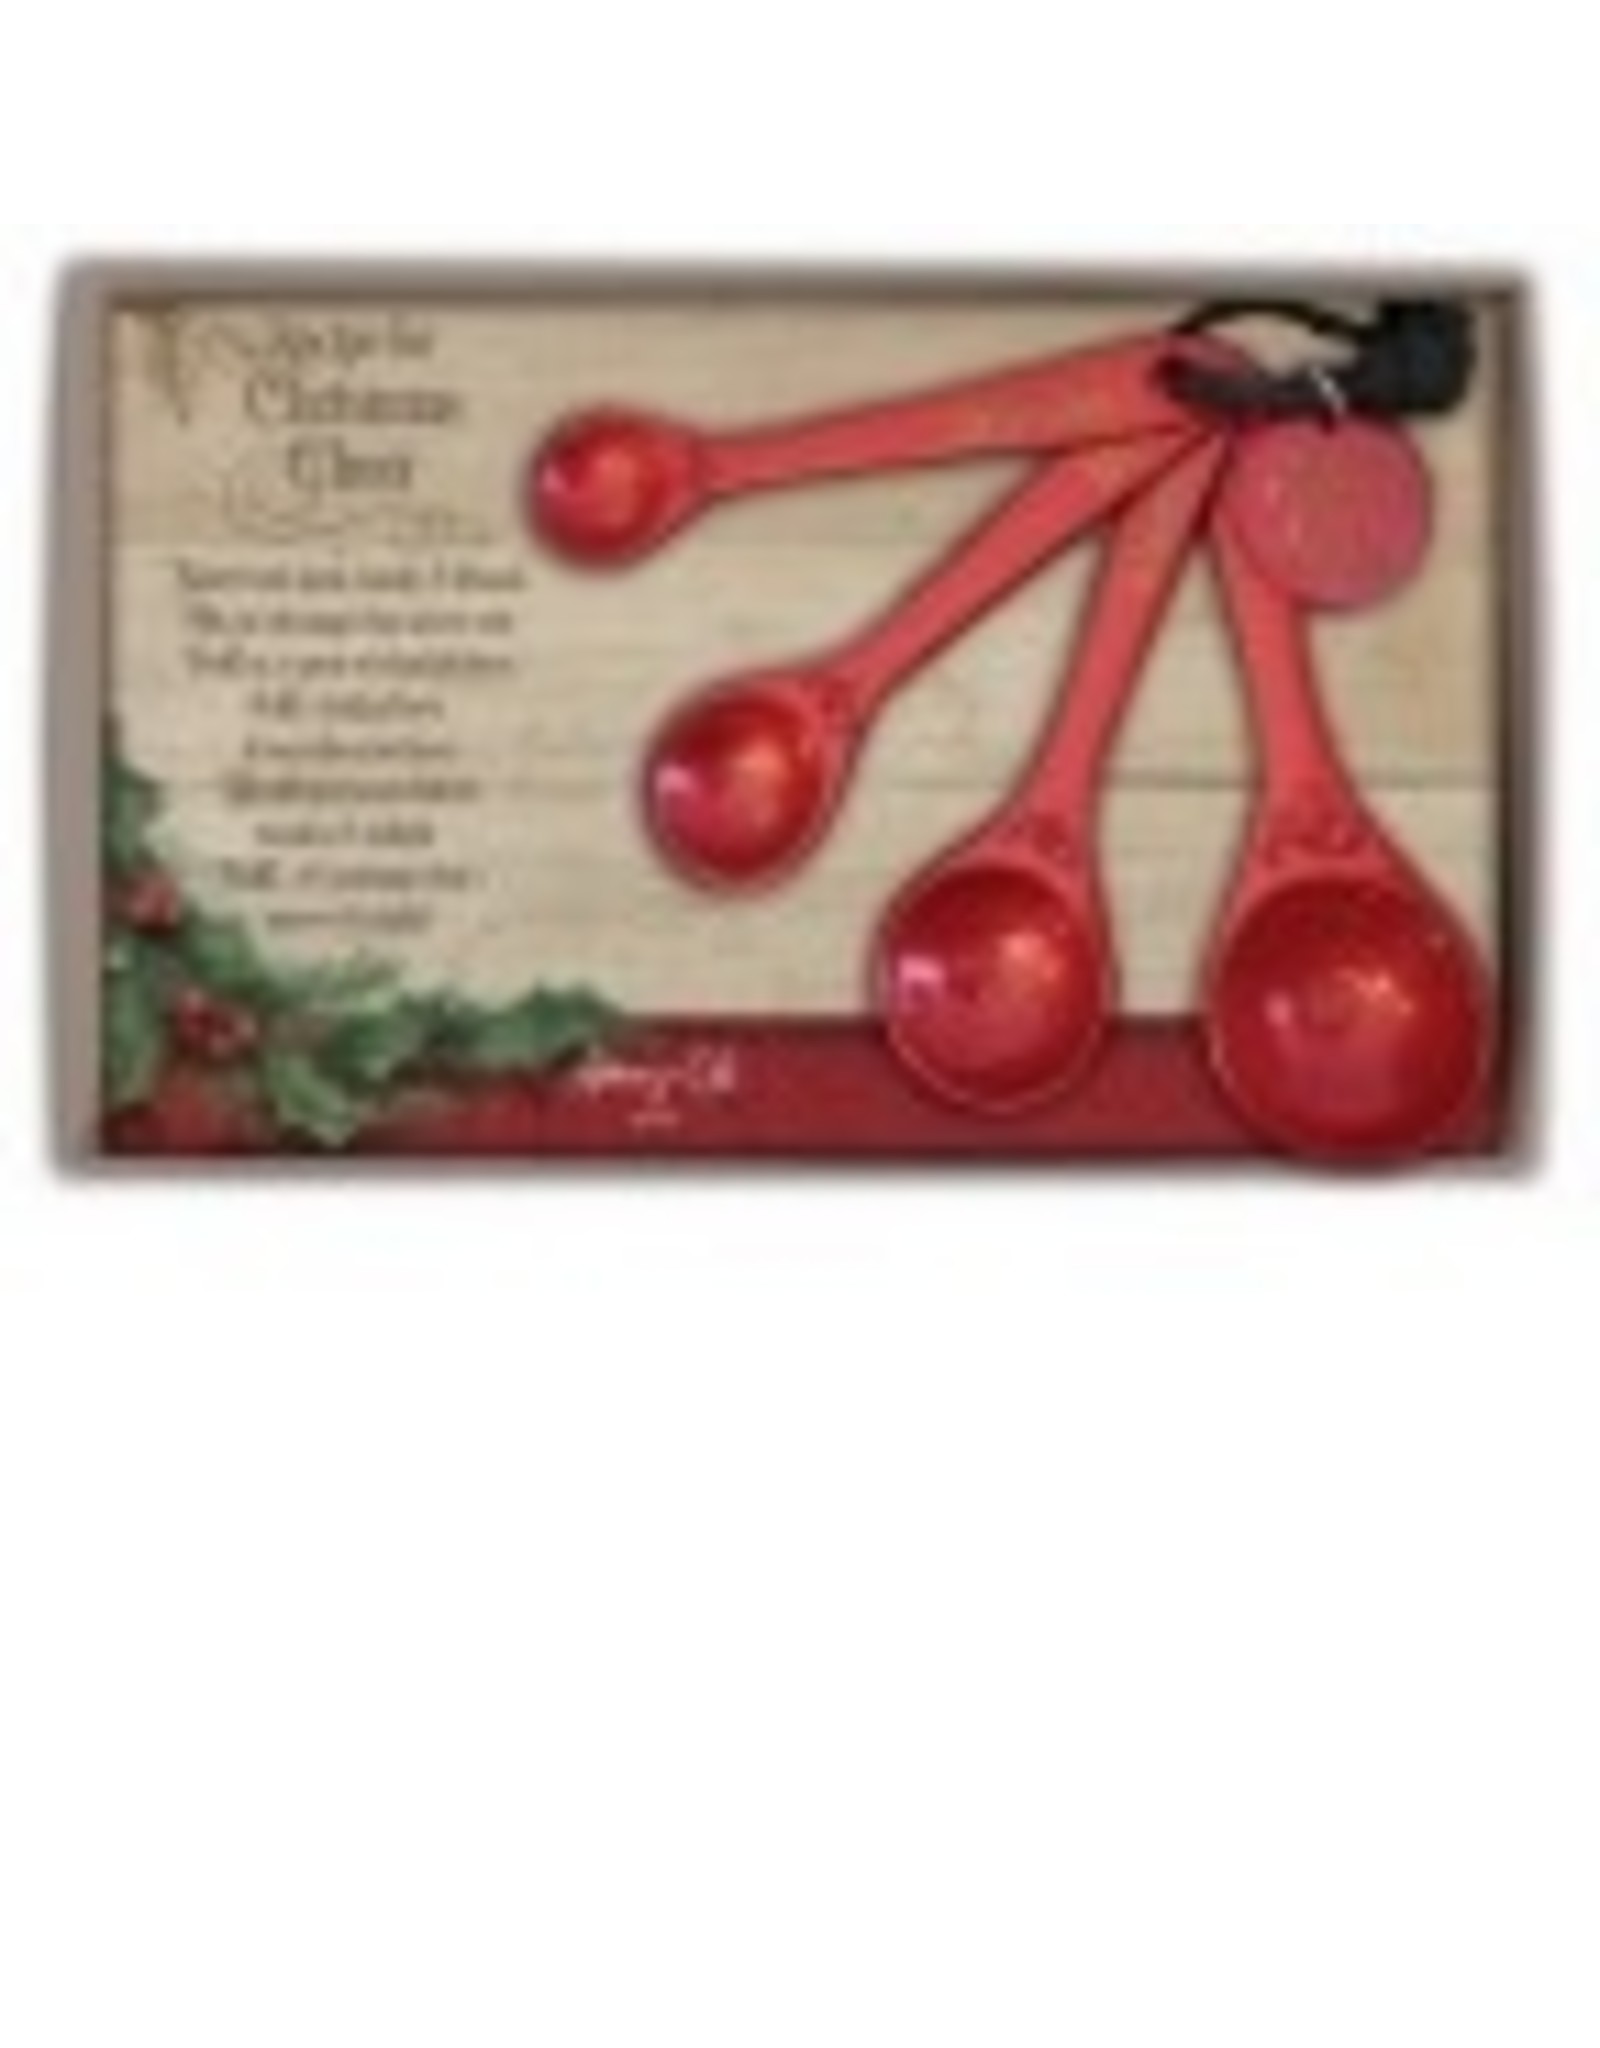 Cathedral Art Red Christmas Cheer Measuring Spoon Set